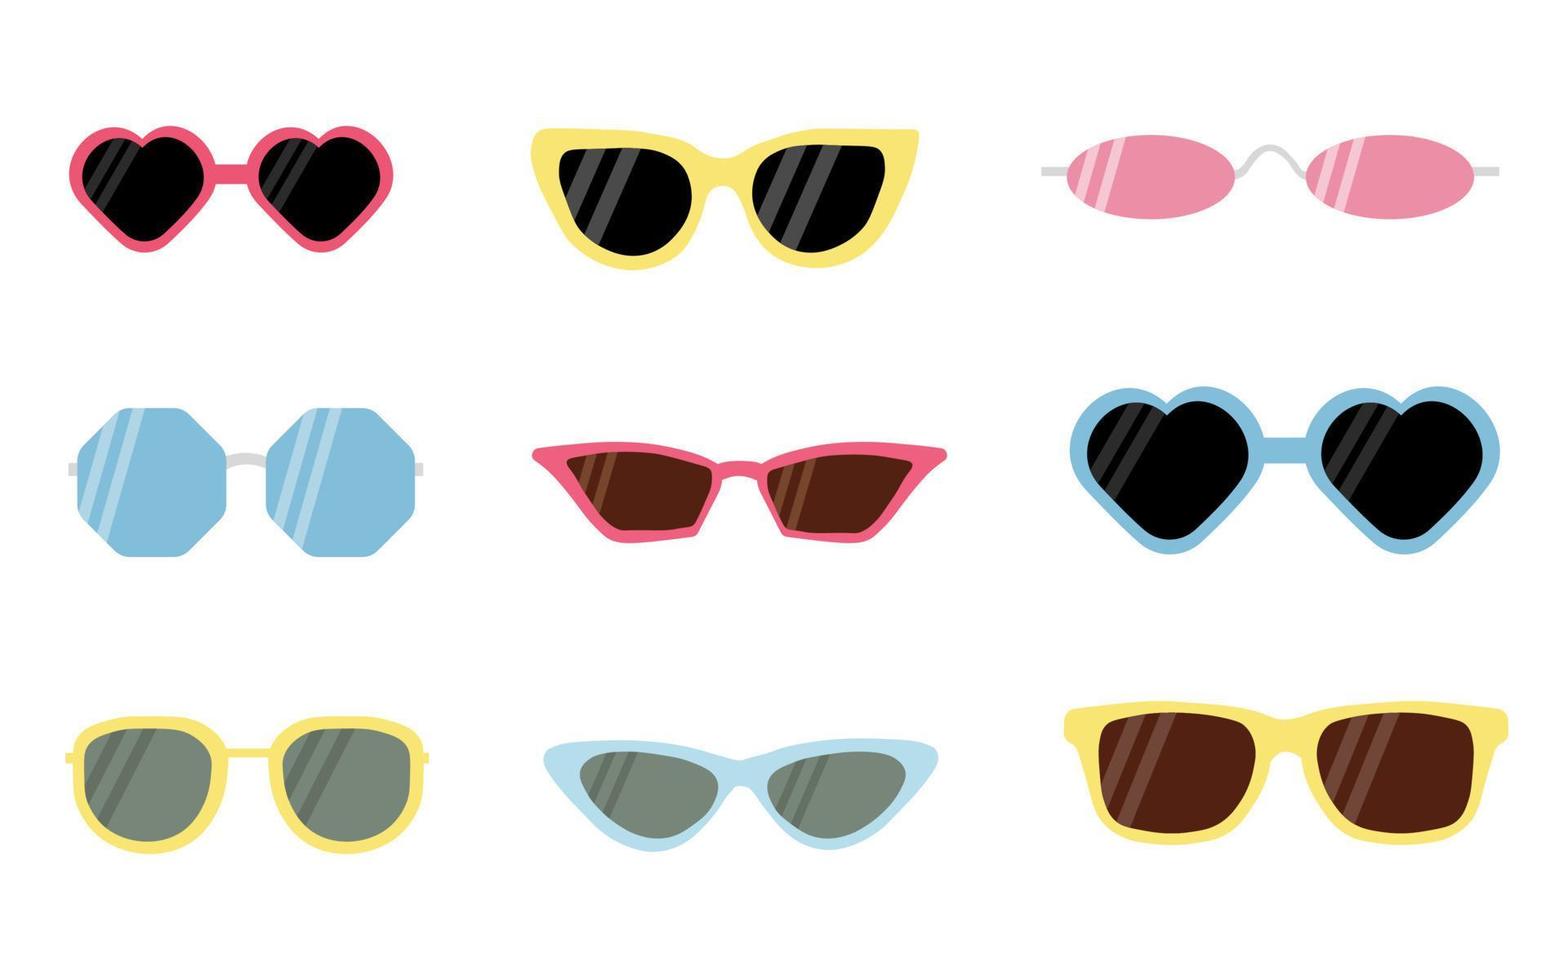 A set of pink, blue and yellow frame sunglasses with black and dark lenses. Vector illustration in flat style